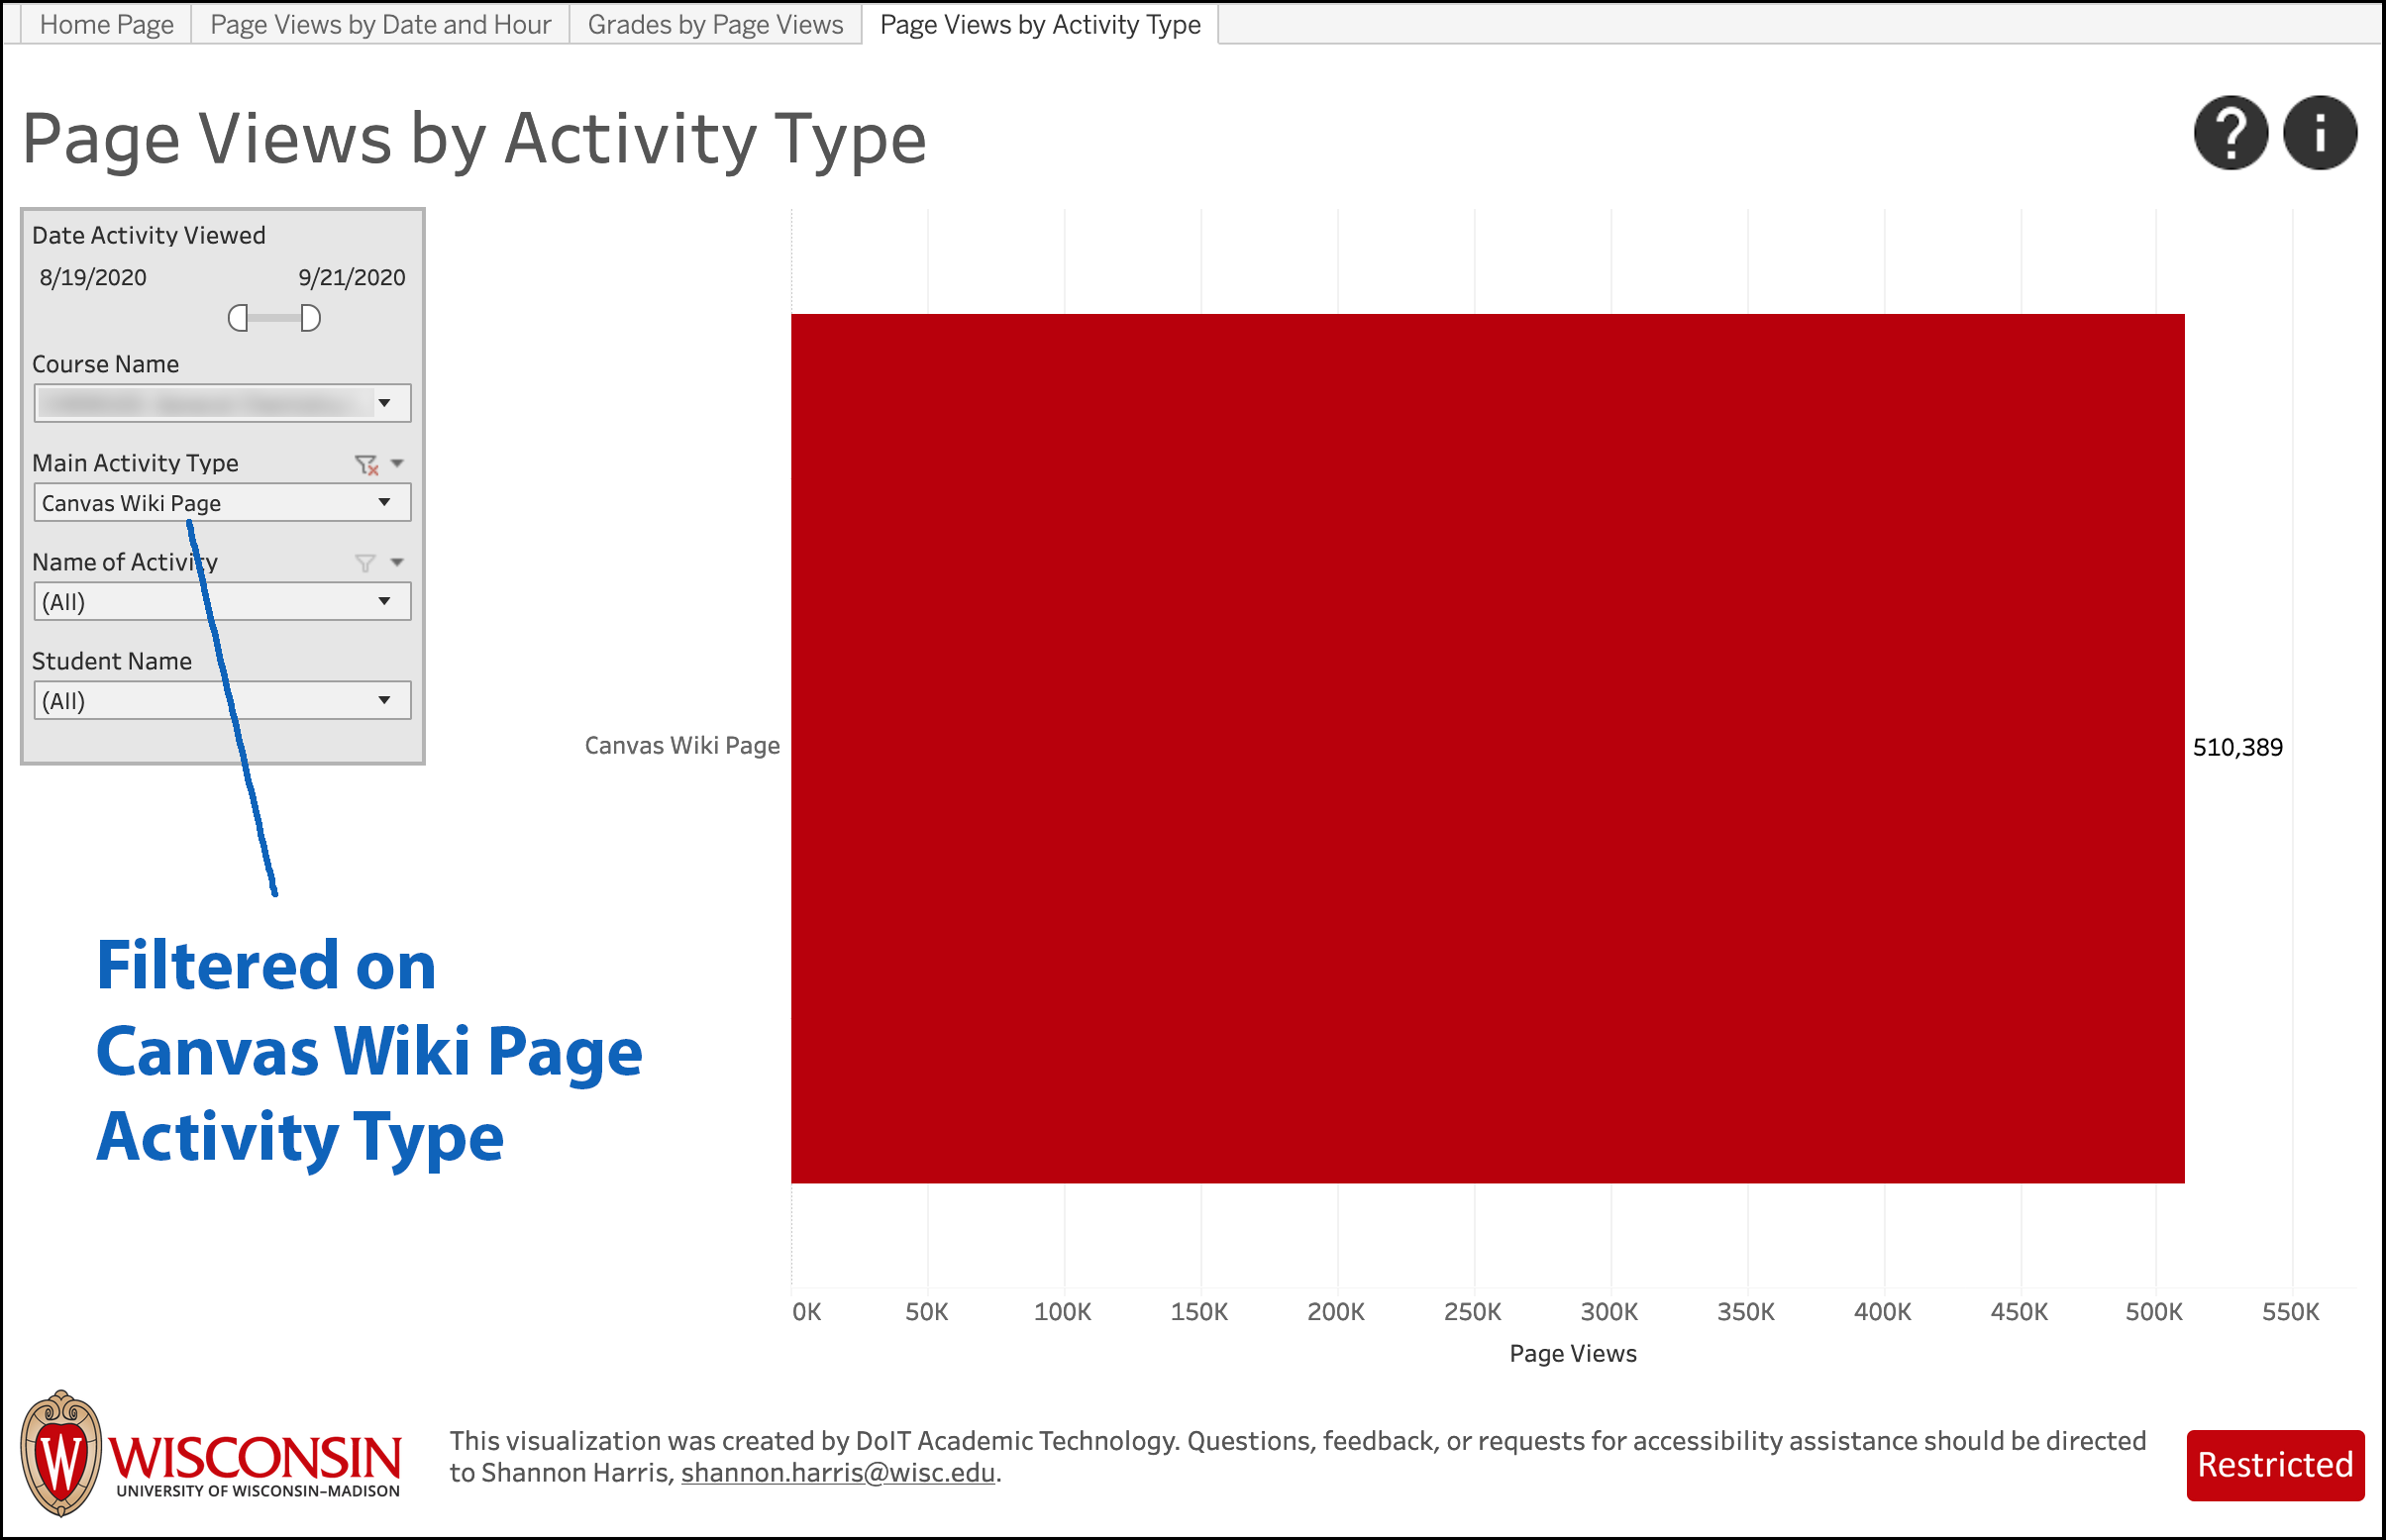 LEAD screenshot - Page Views by Activity Type, filtered to Activity Type